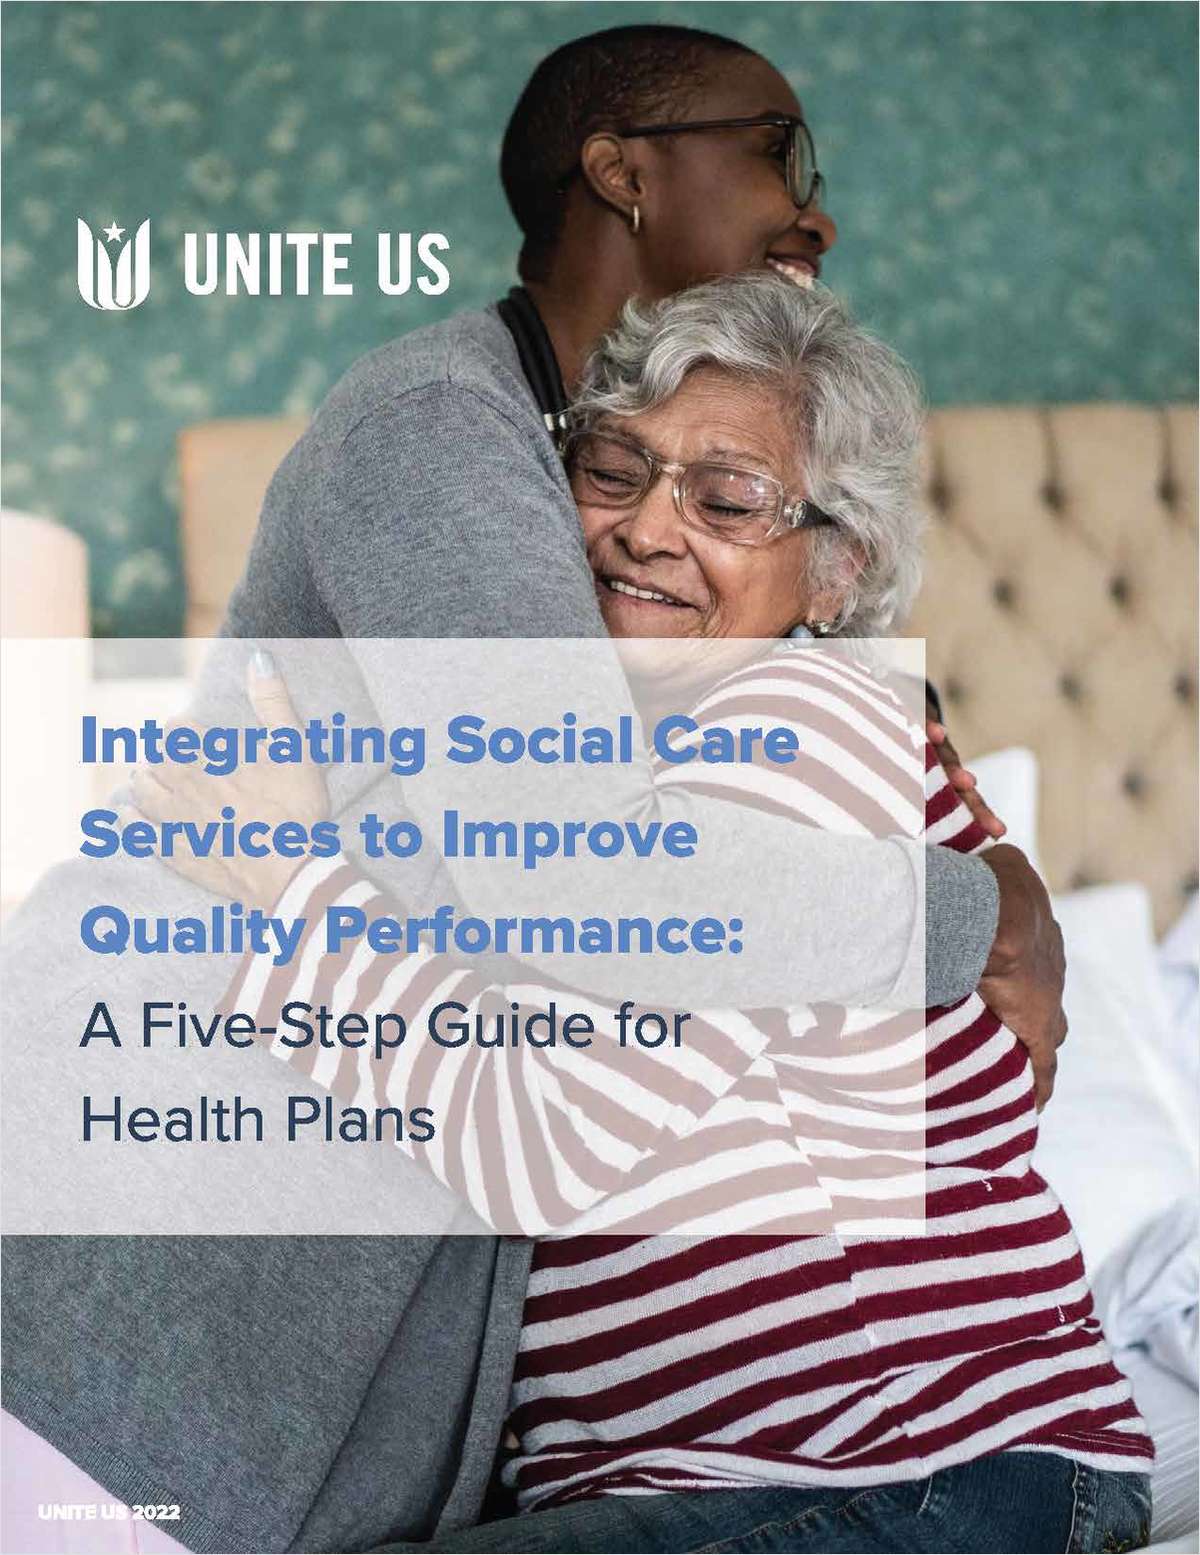 Integrating Social Care Services to Improve Quality Performance